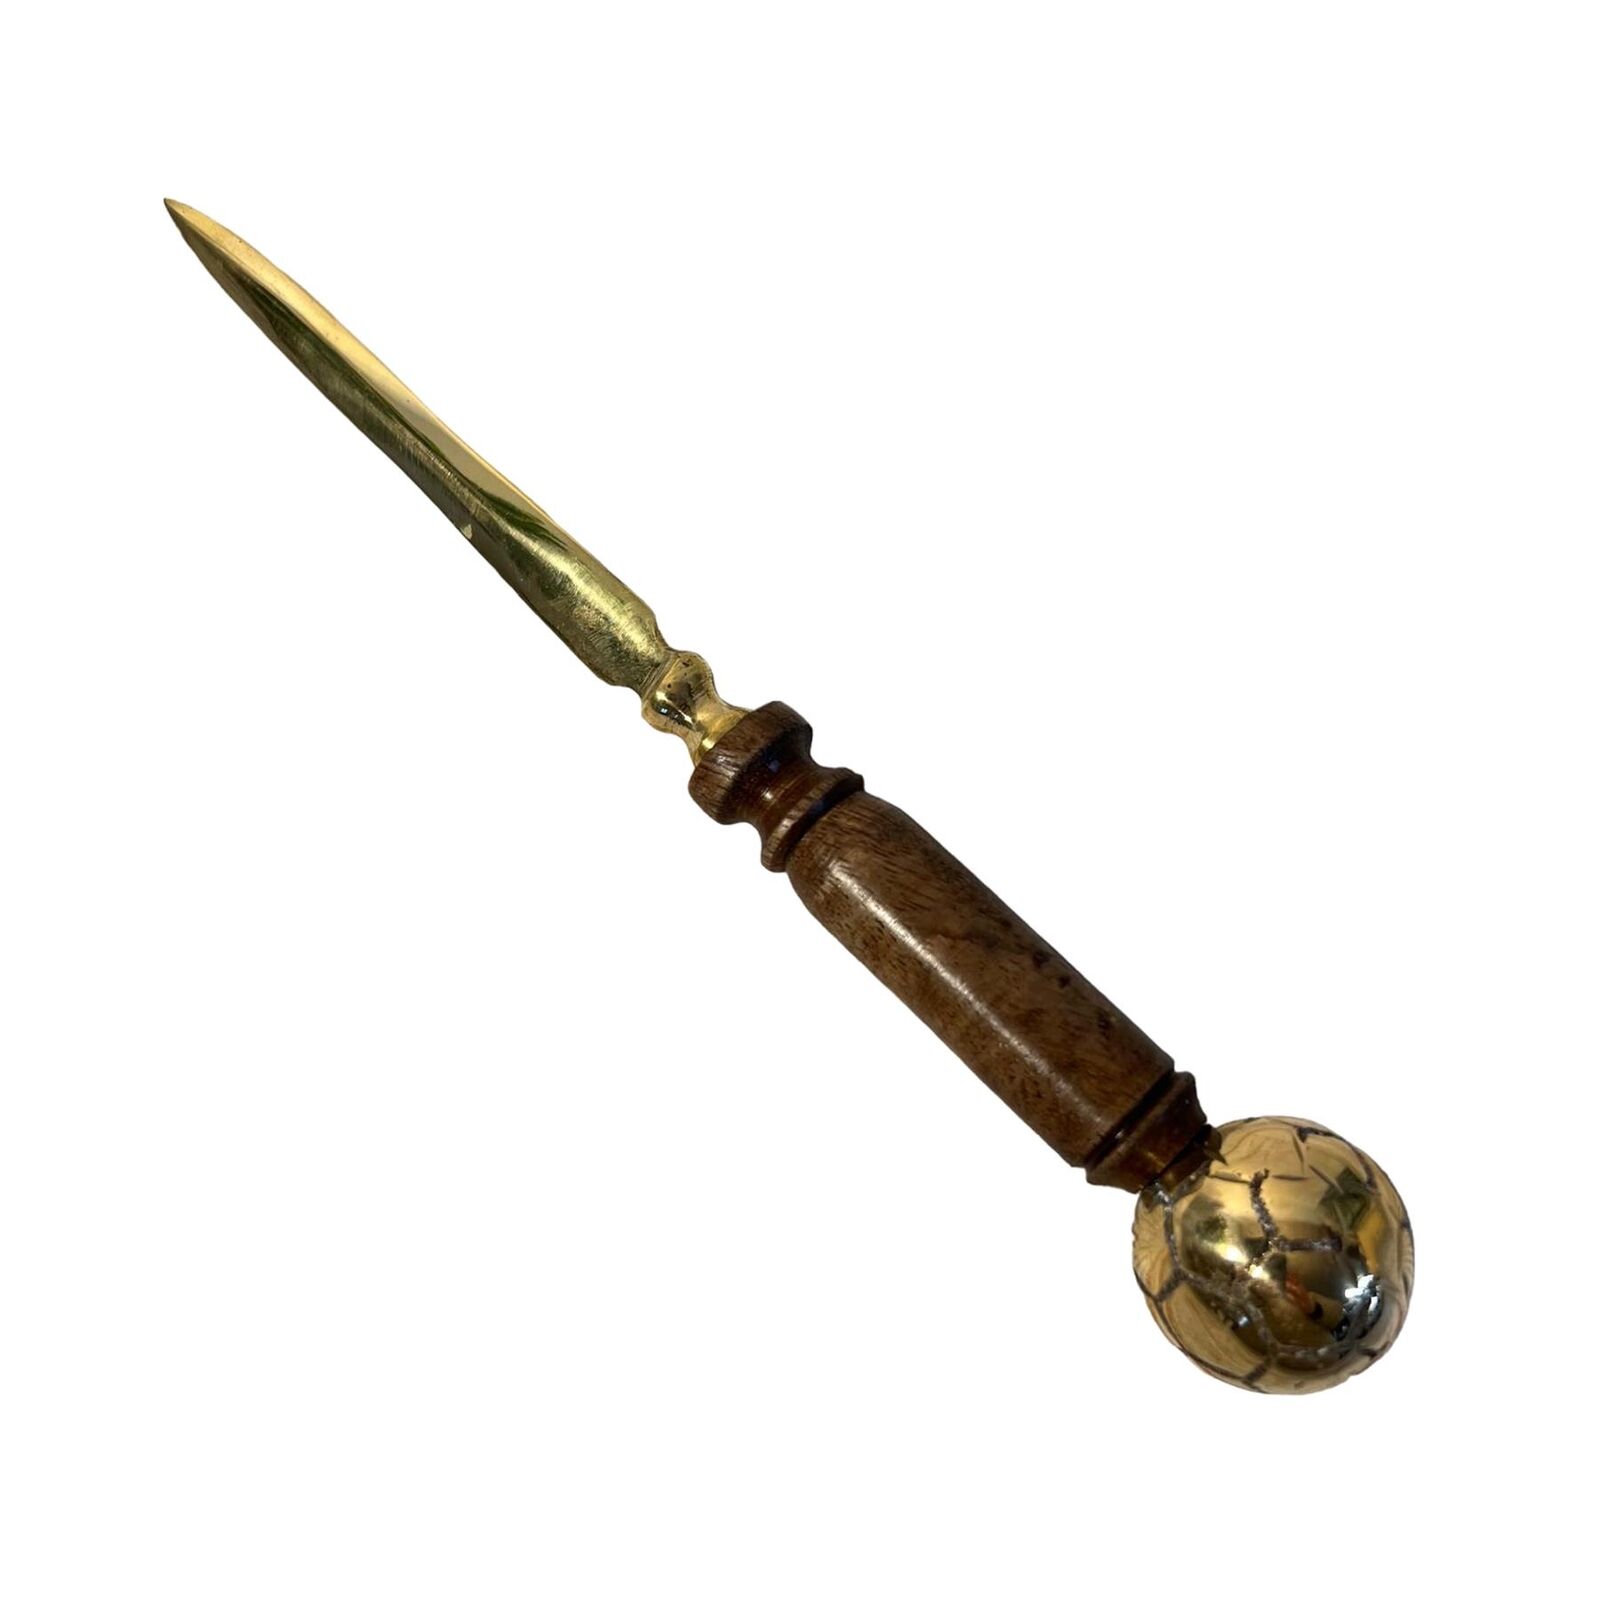 Wooden-handled Brass Letter Opener with football-shaped end